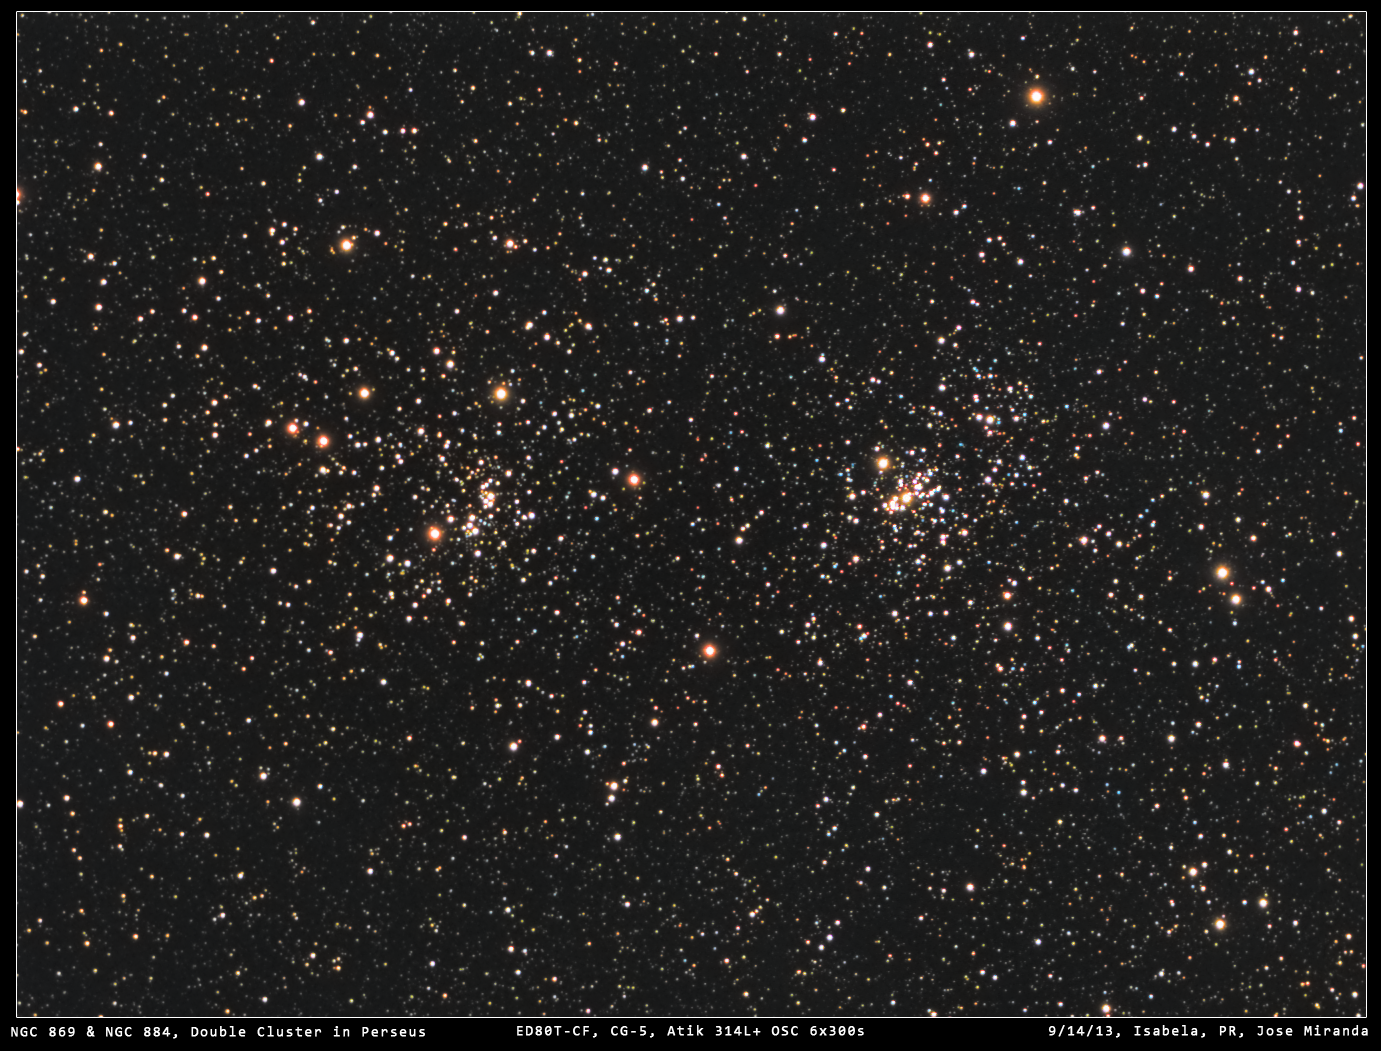 NGC 869 & NGC 884, Double Cluster in Perseus